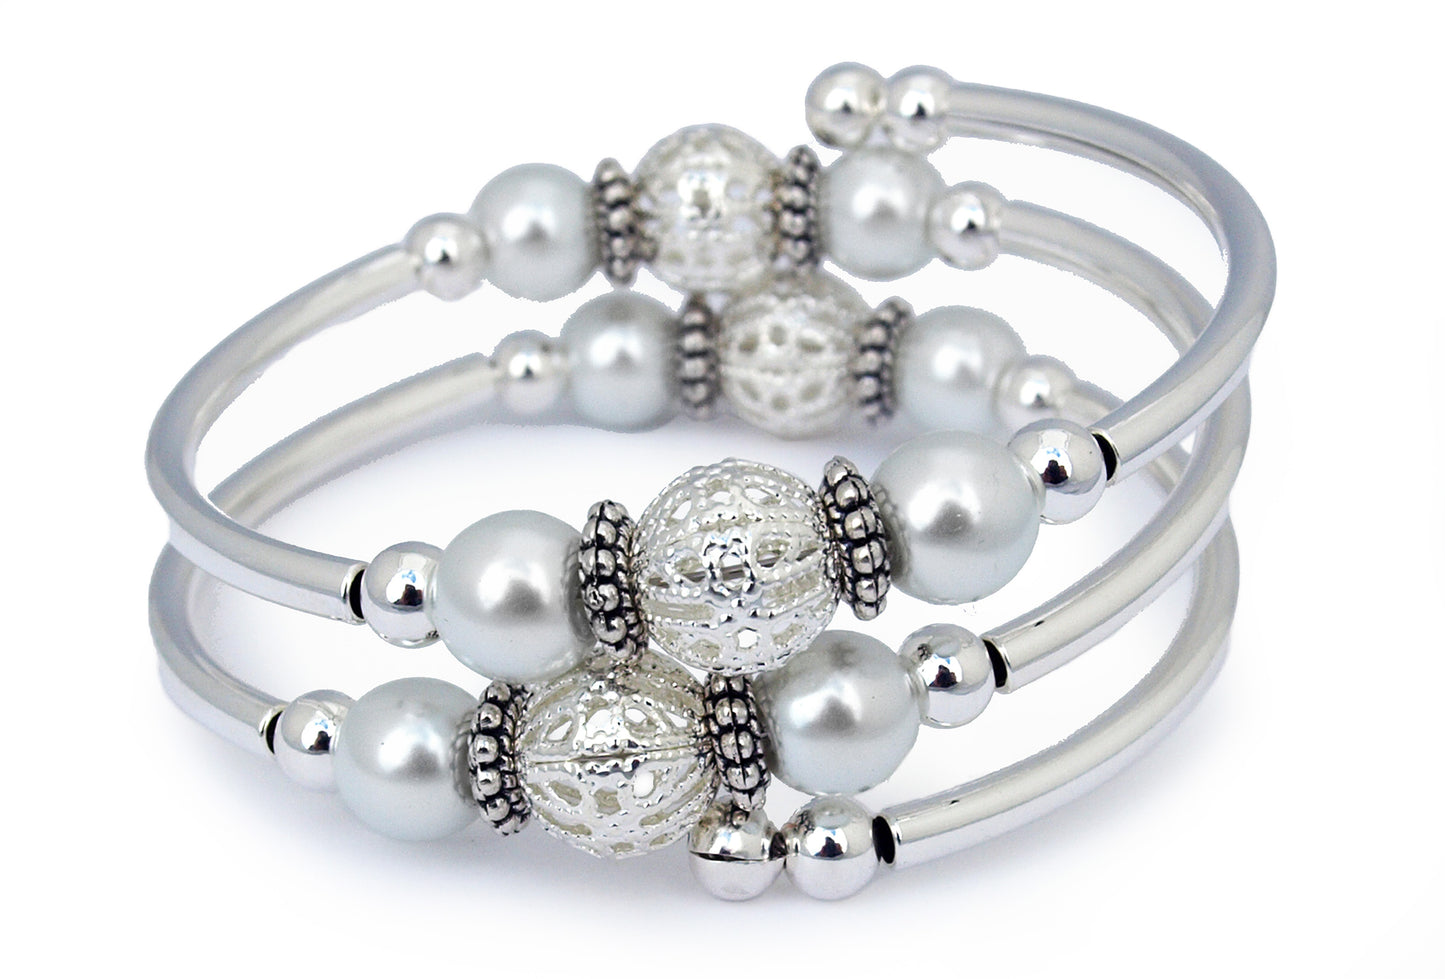 Alabaster Lace - Silver Filigree and Pearl Bracelet